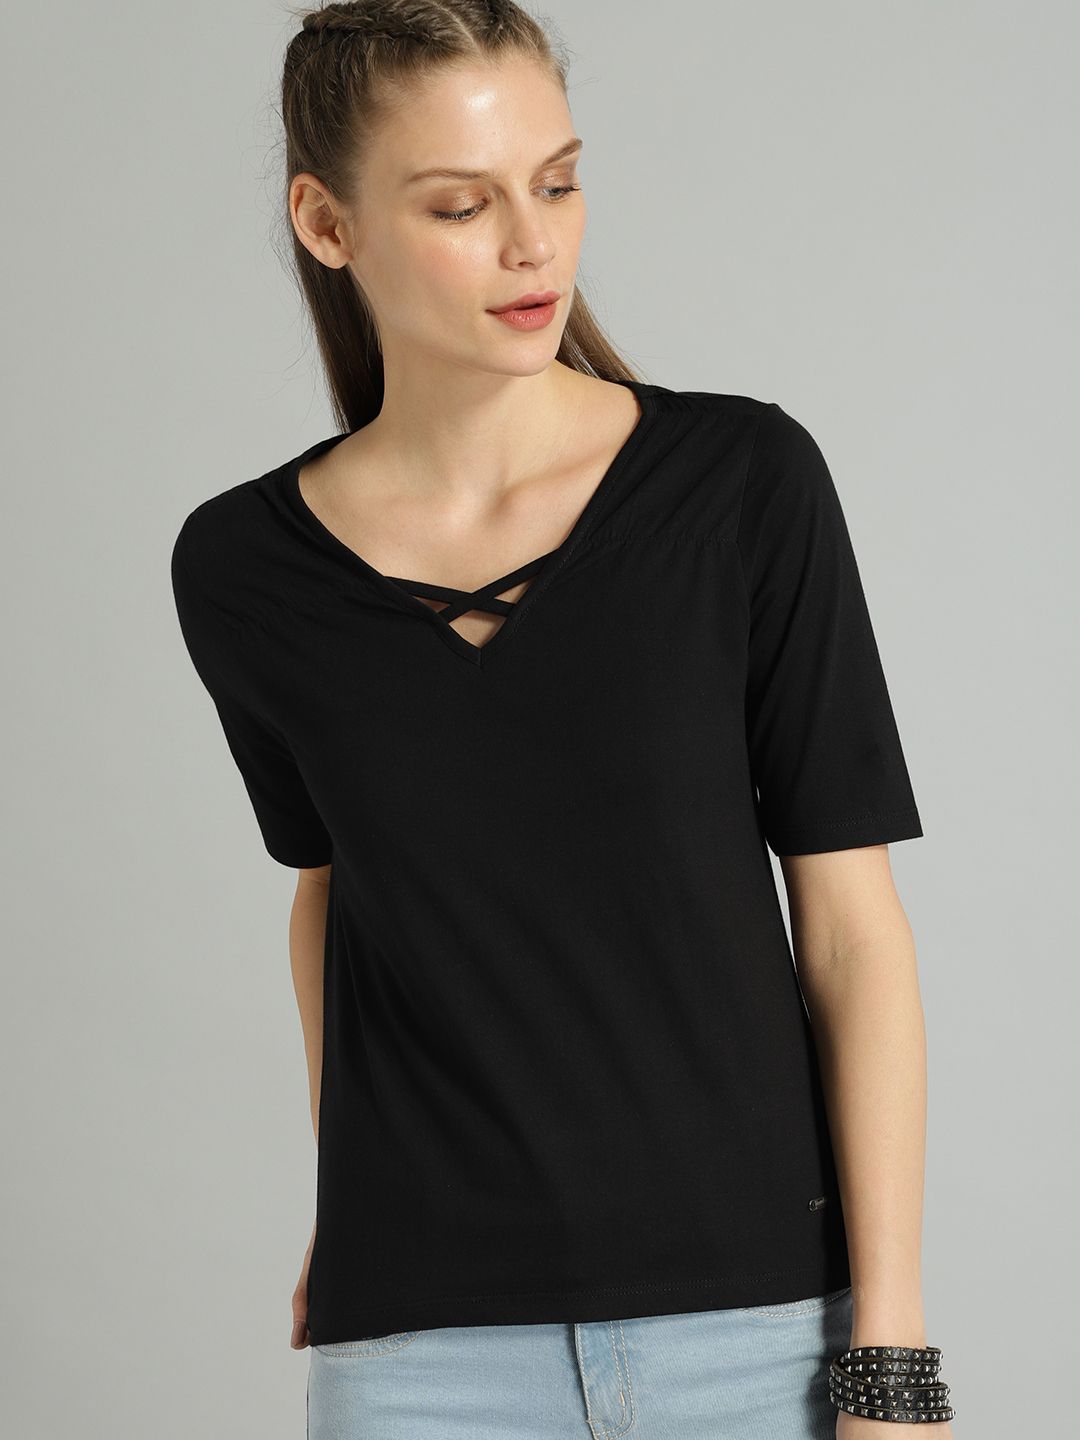 The Roadster Lifestyle Co Women Black Solid Pure Cotton Top Price in India